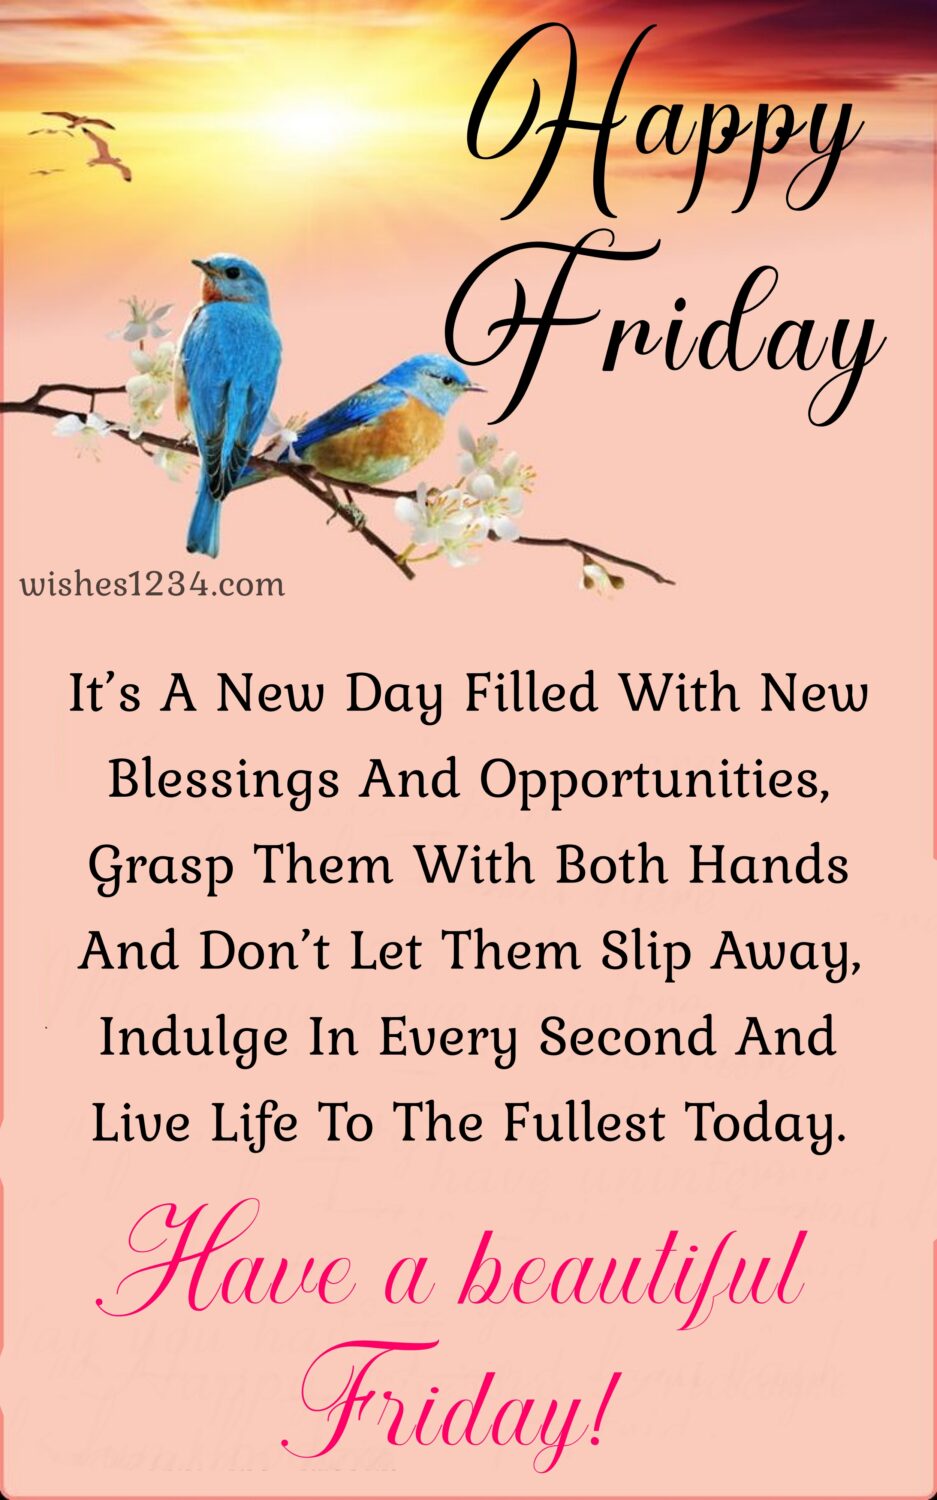 Friday blessings with two birds sitting on branch, Quotes about Friday